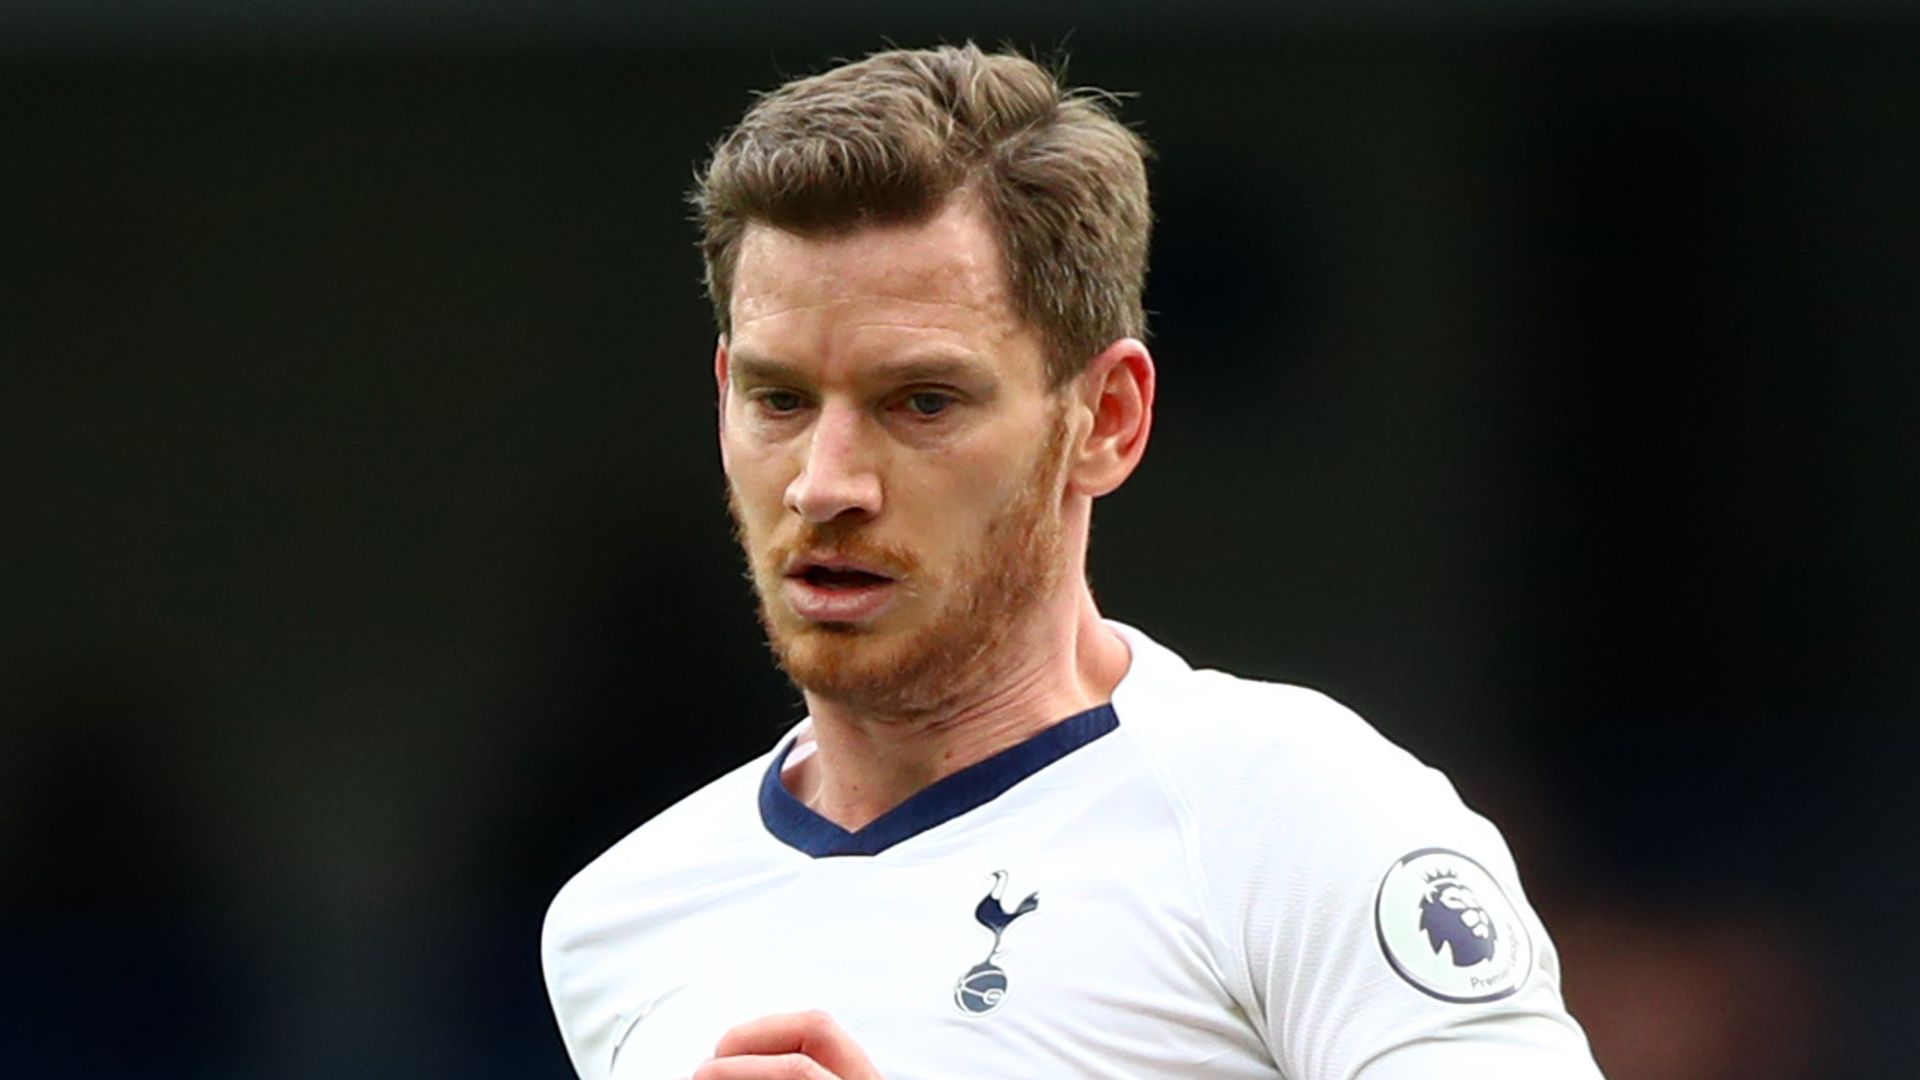 Vertonghen set to join Benfica on three-year deal